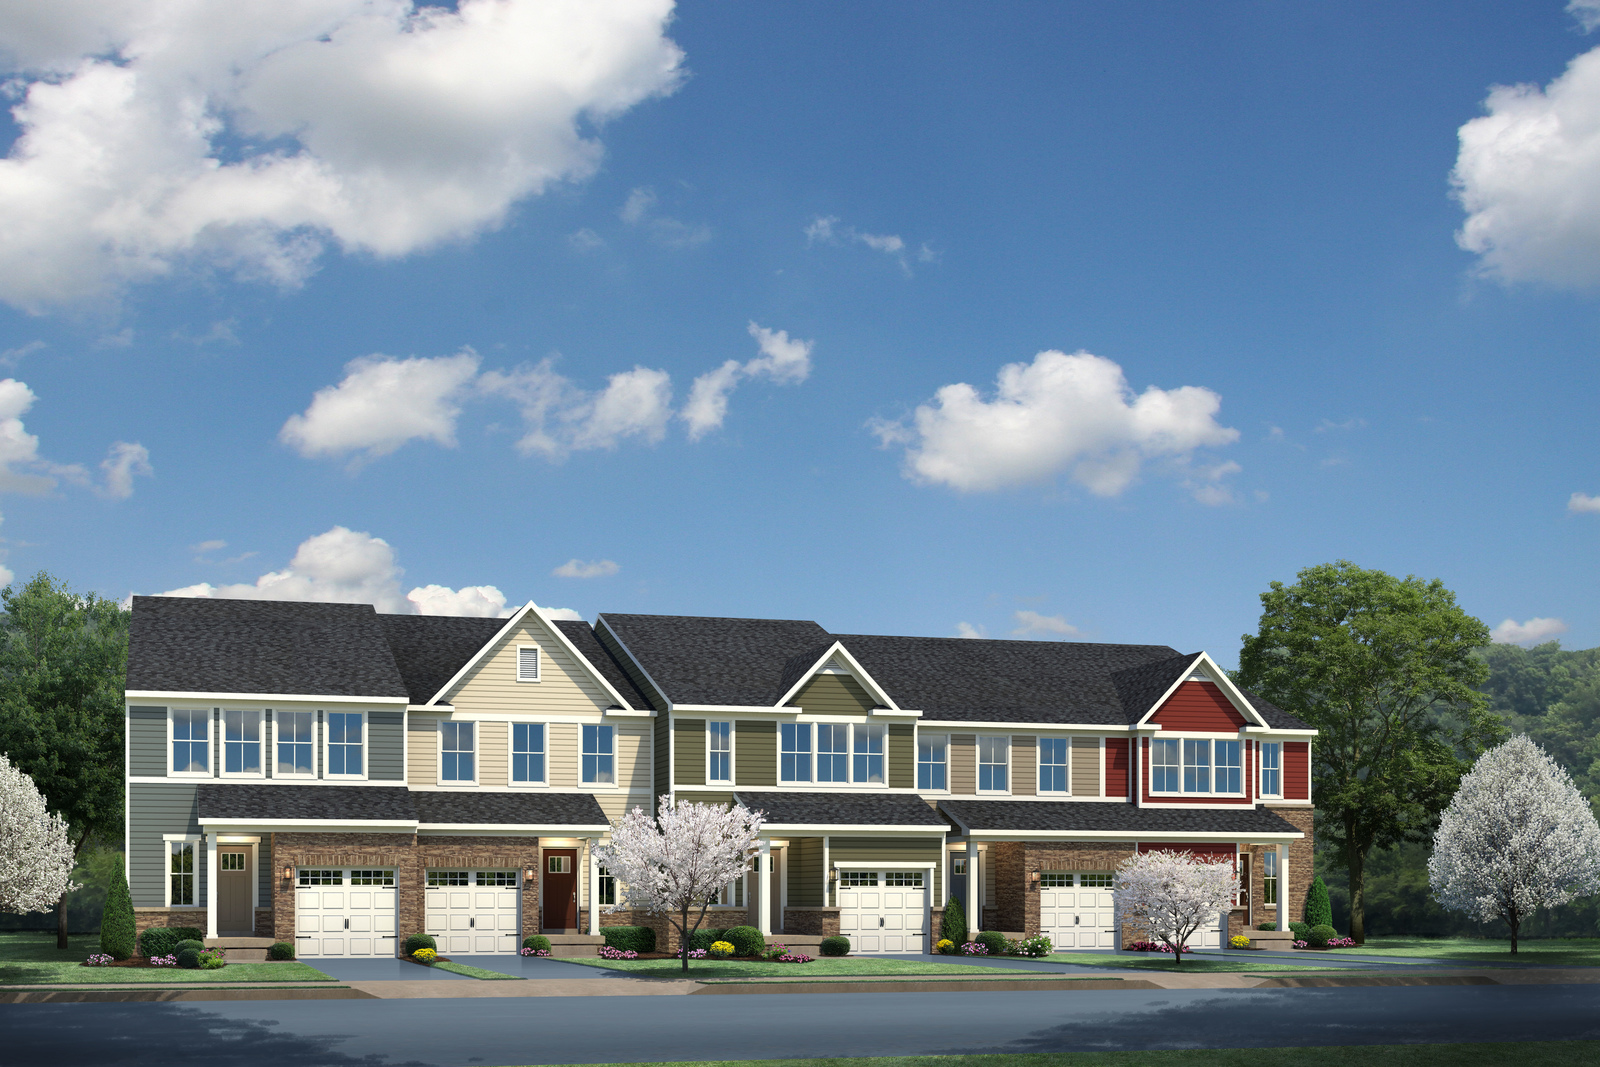 New, modern townhomes packed with luxury features like granite countertops, upgraded cabinets and more are centrally located off Route 10. Click here to schedule your  visit!